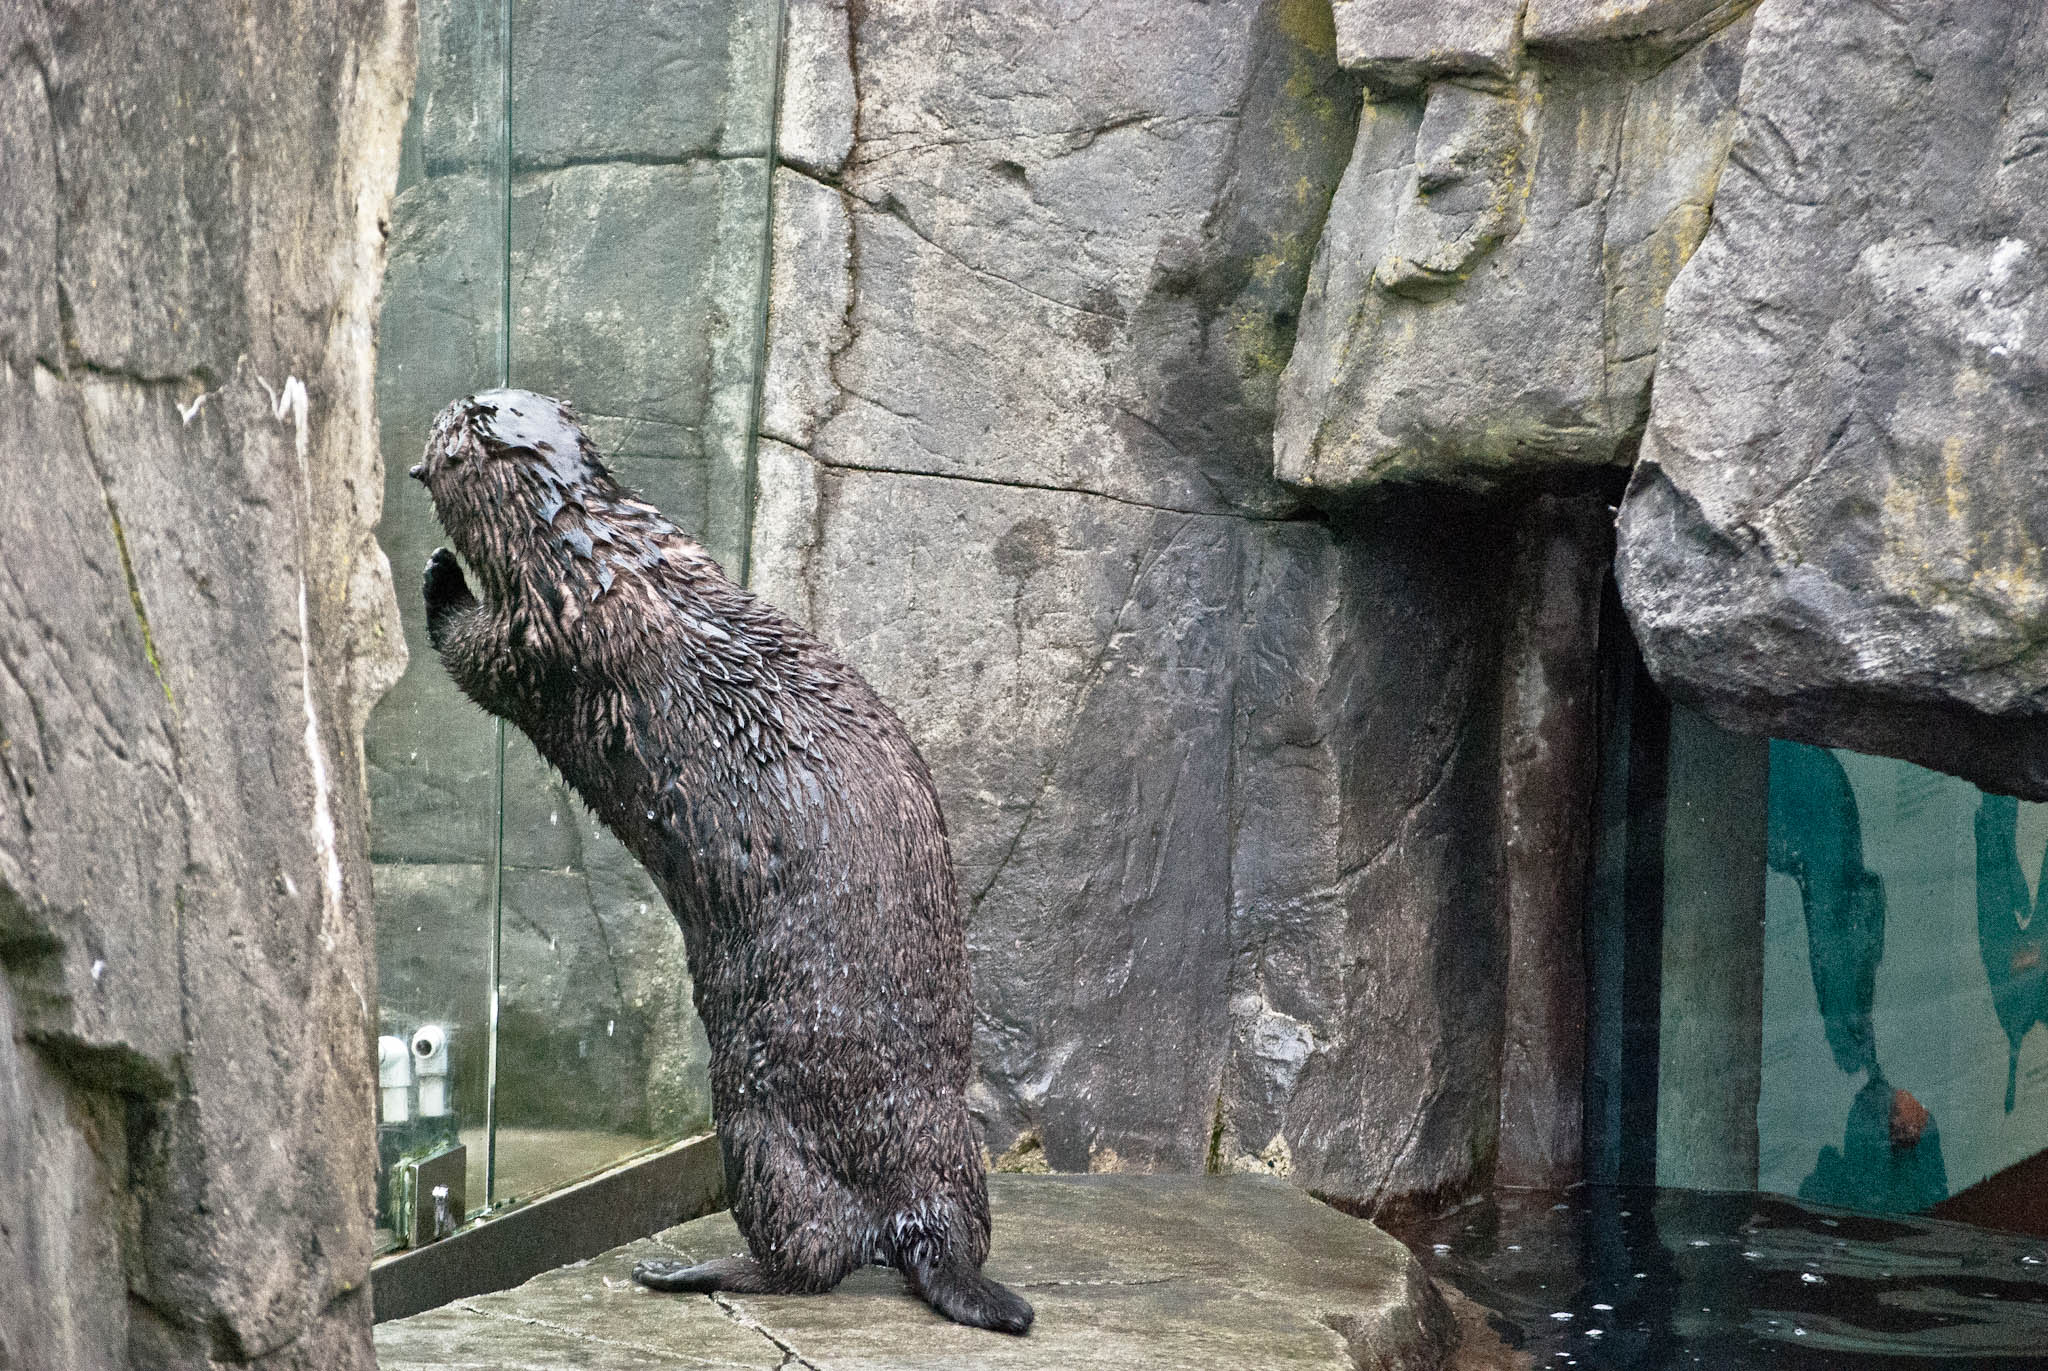 Sea Otter Wants to Visit His Friend in the Next Enclosure